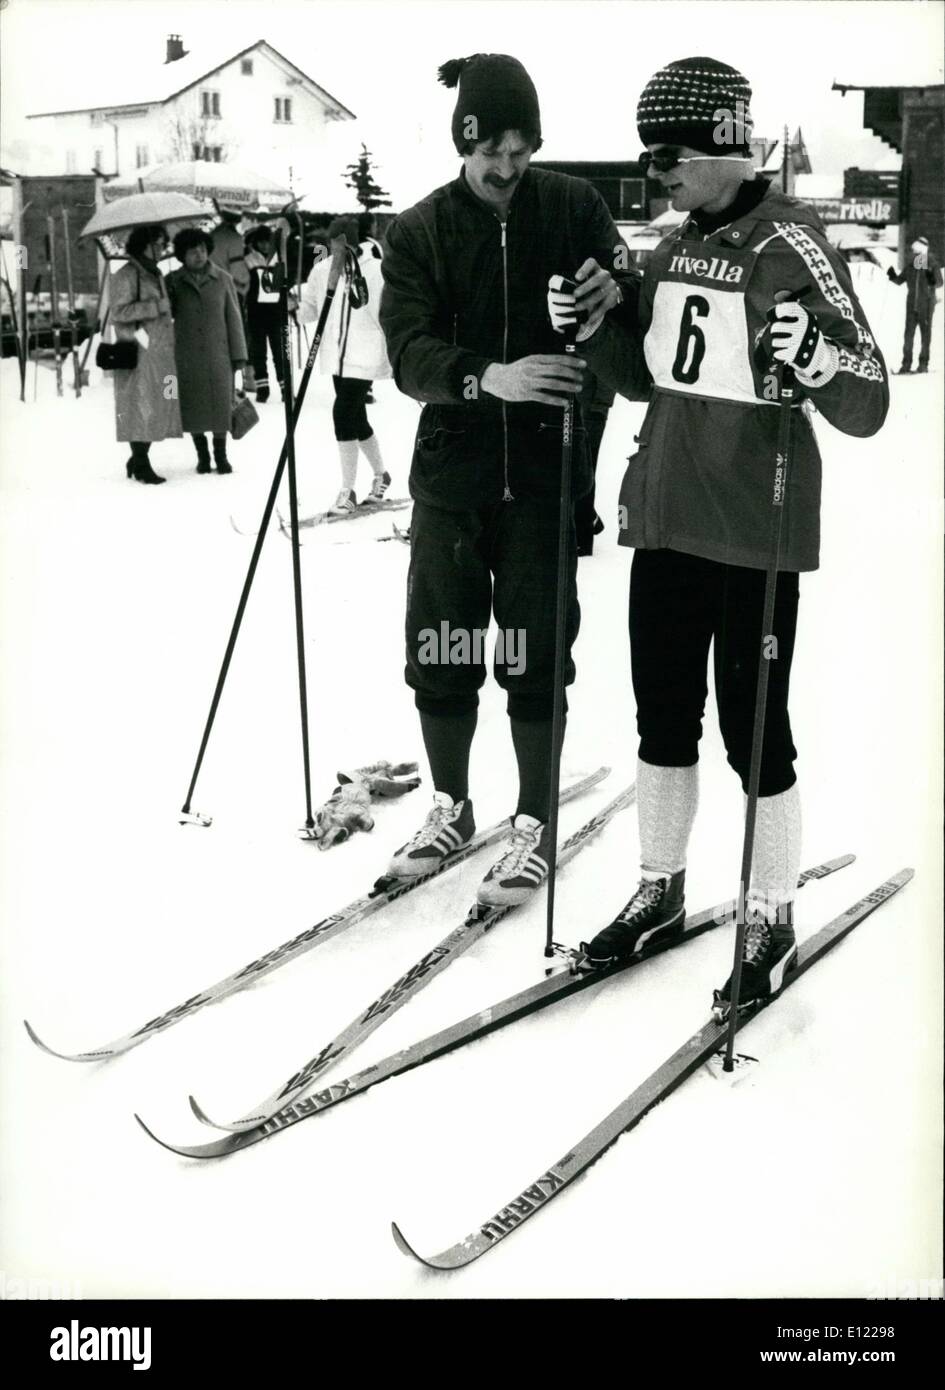 Mar. 03, 1982 - Cross-country-ski championship for the handicaped in Switzerland: The 7th Swiss cross-country-ski championship for the handicaped took place at Unteriberg, Switz., last weekend. Photo shows a blind compeditor being assisted by a fellow skier. Stock Photo